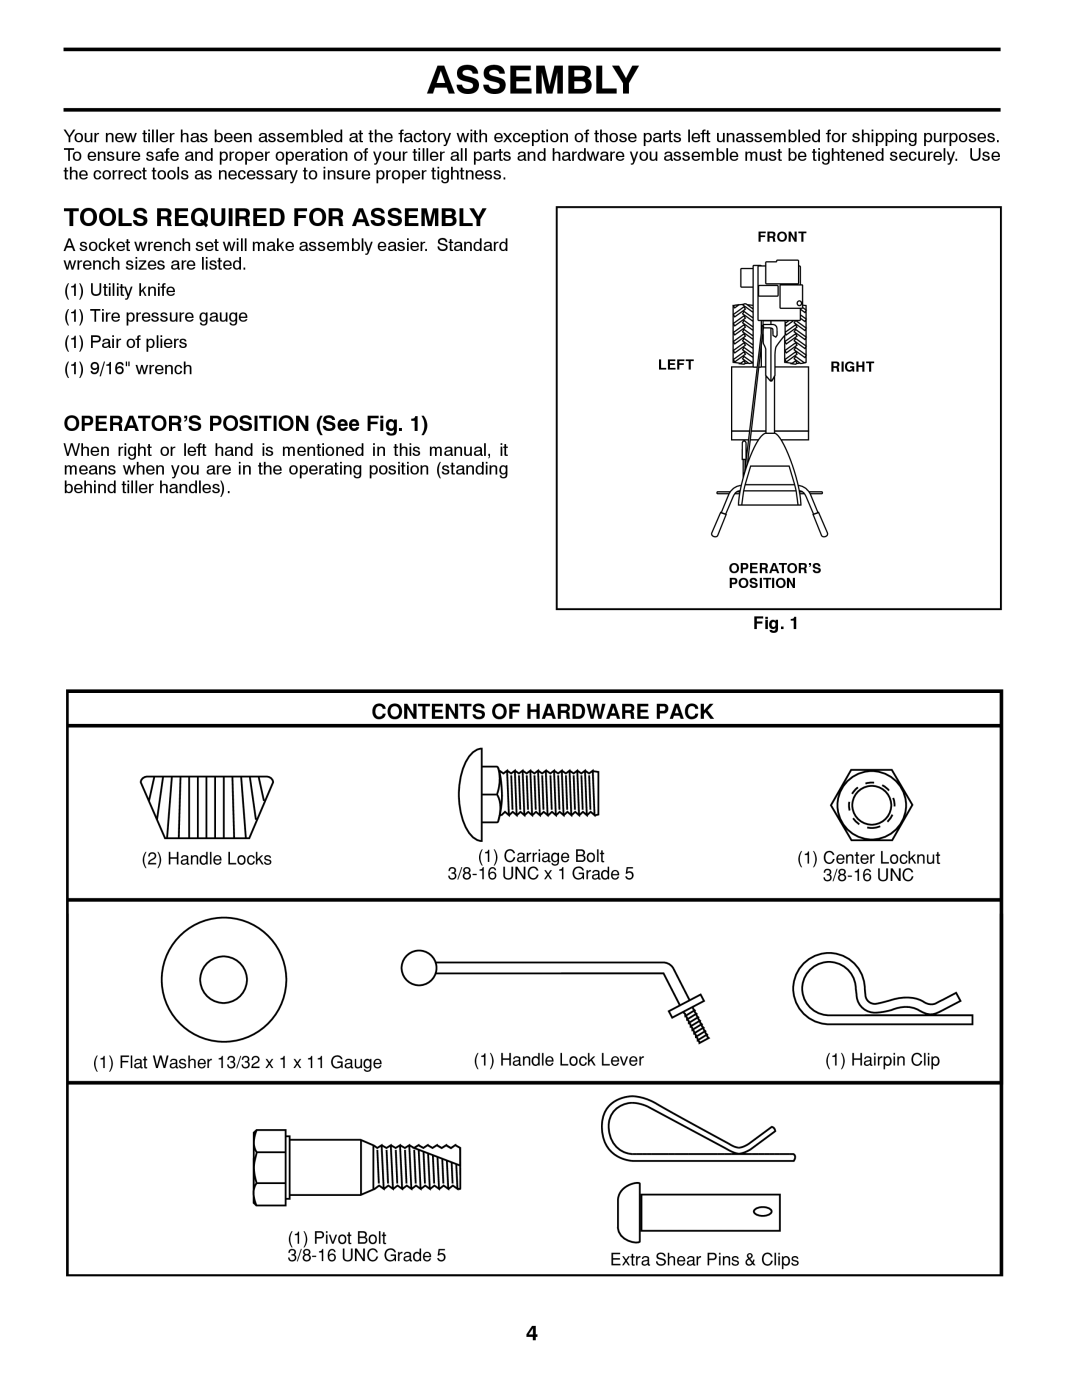 Poulan PRRT900 manual Tools Required For Assembly, OPERATOR’S POSITION See Fig, Contents Of Hardware Pack 